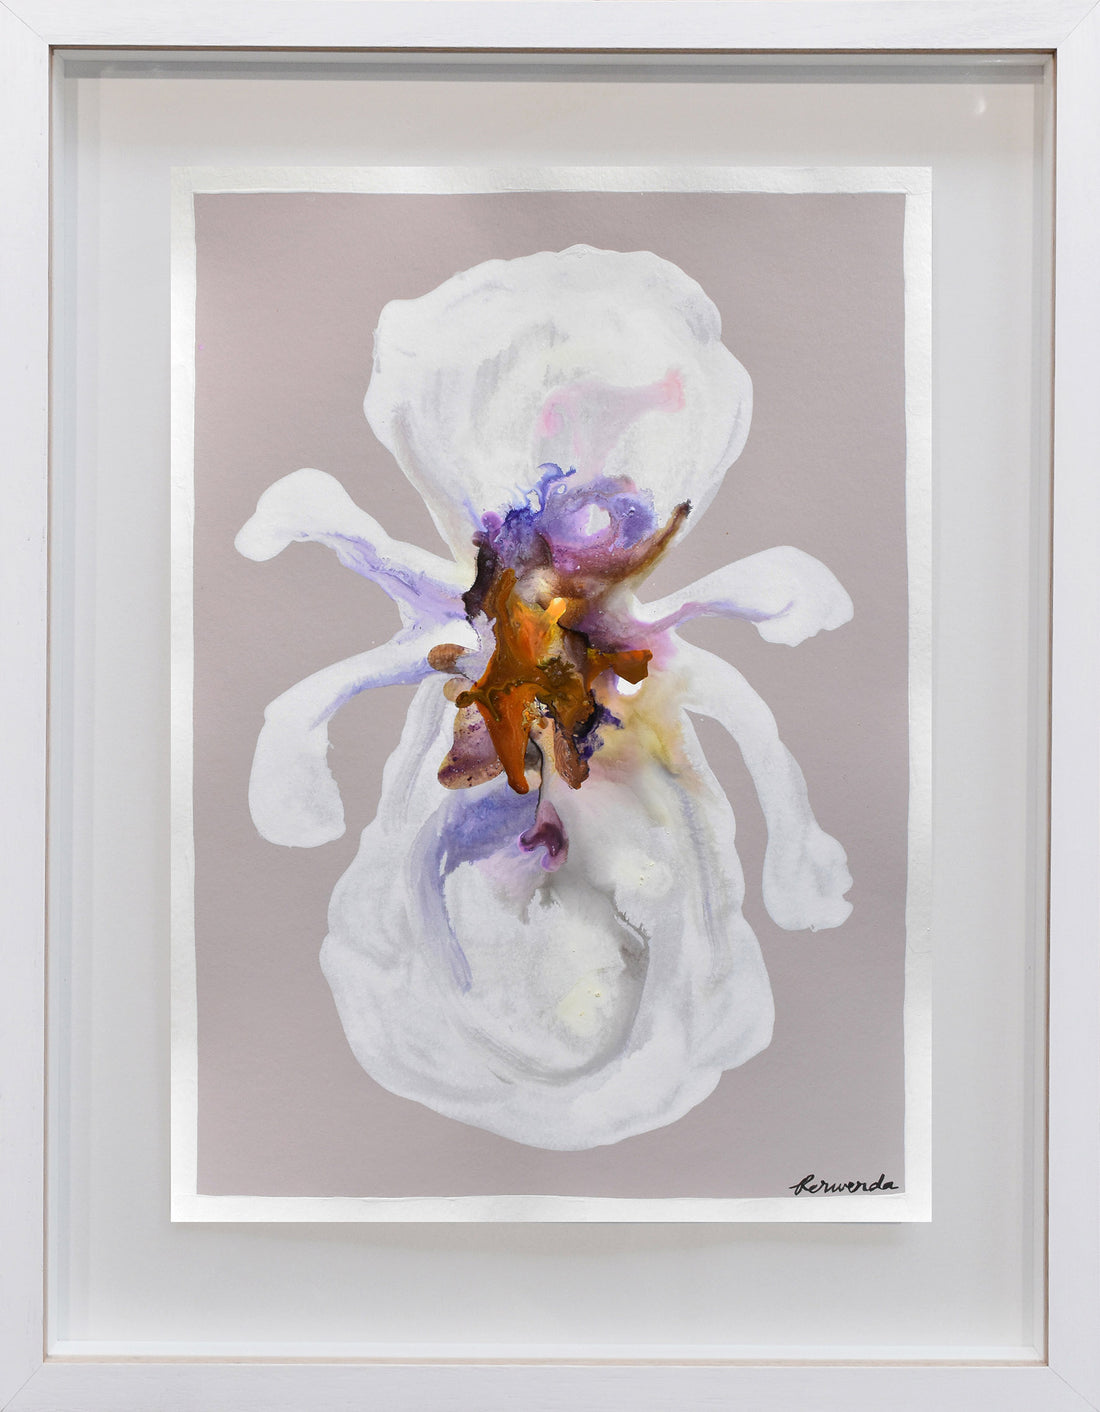 Antoinette Ferwerda | Virtue (2022) - Original artwork on paper, framed behind glass in natural oak with a white painted facade (56.5cm x 44cm)